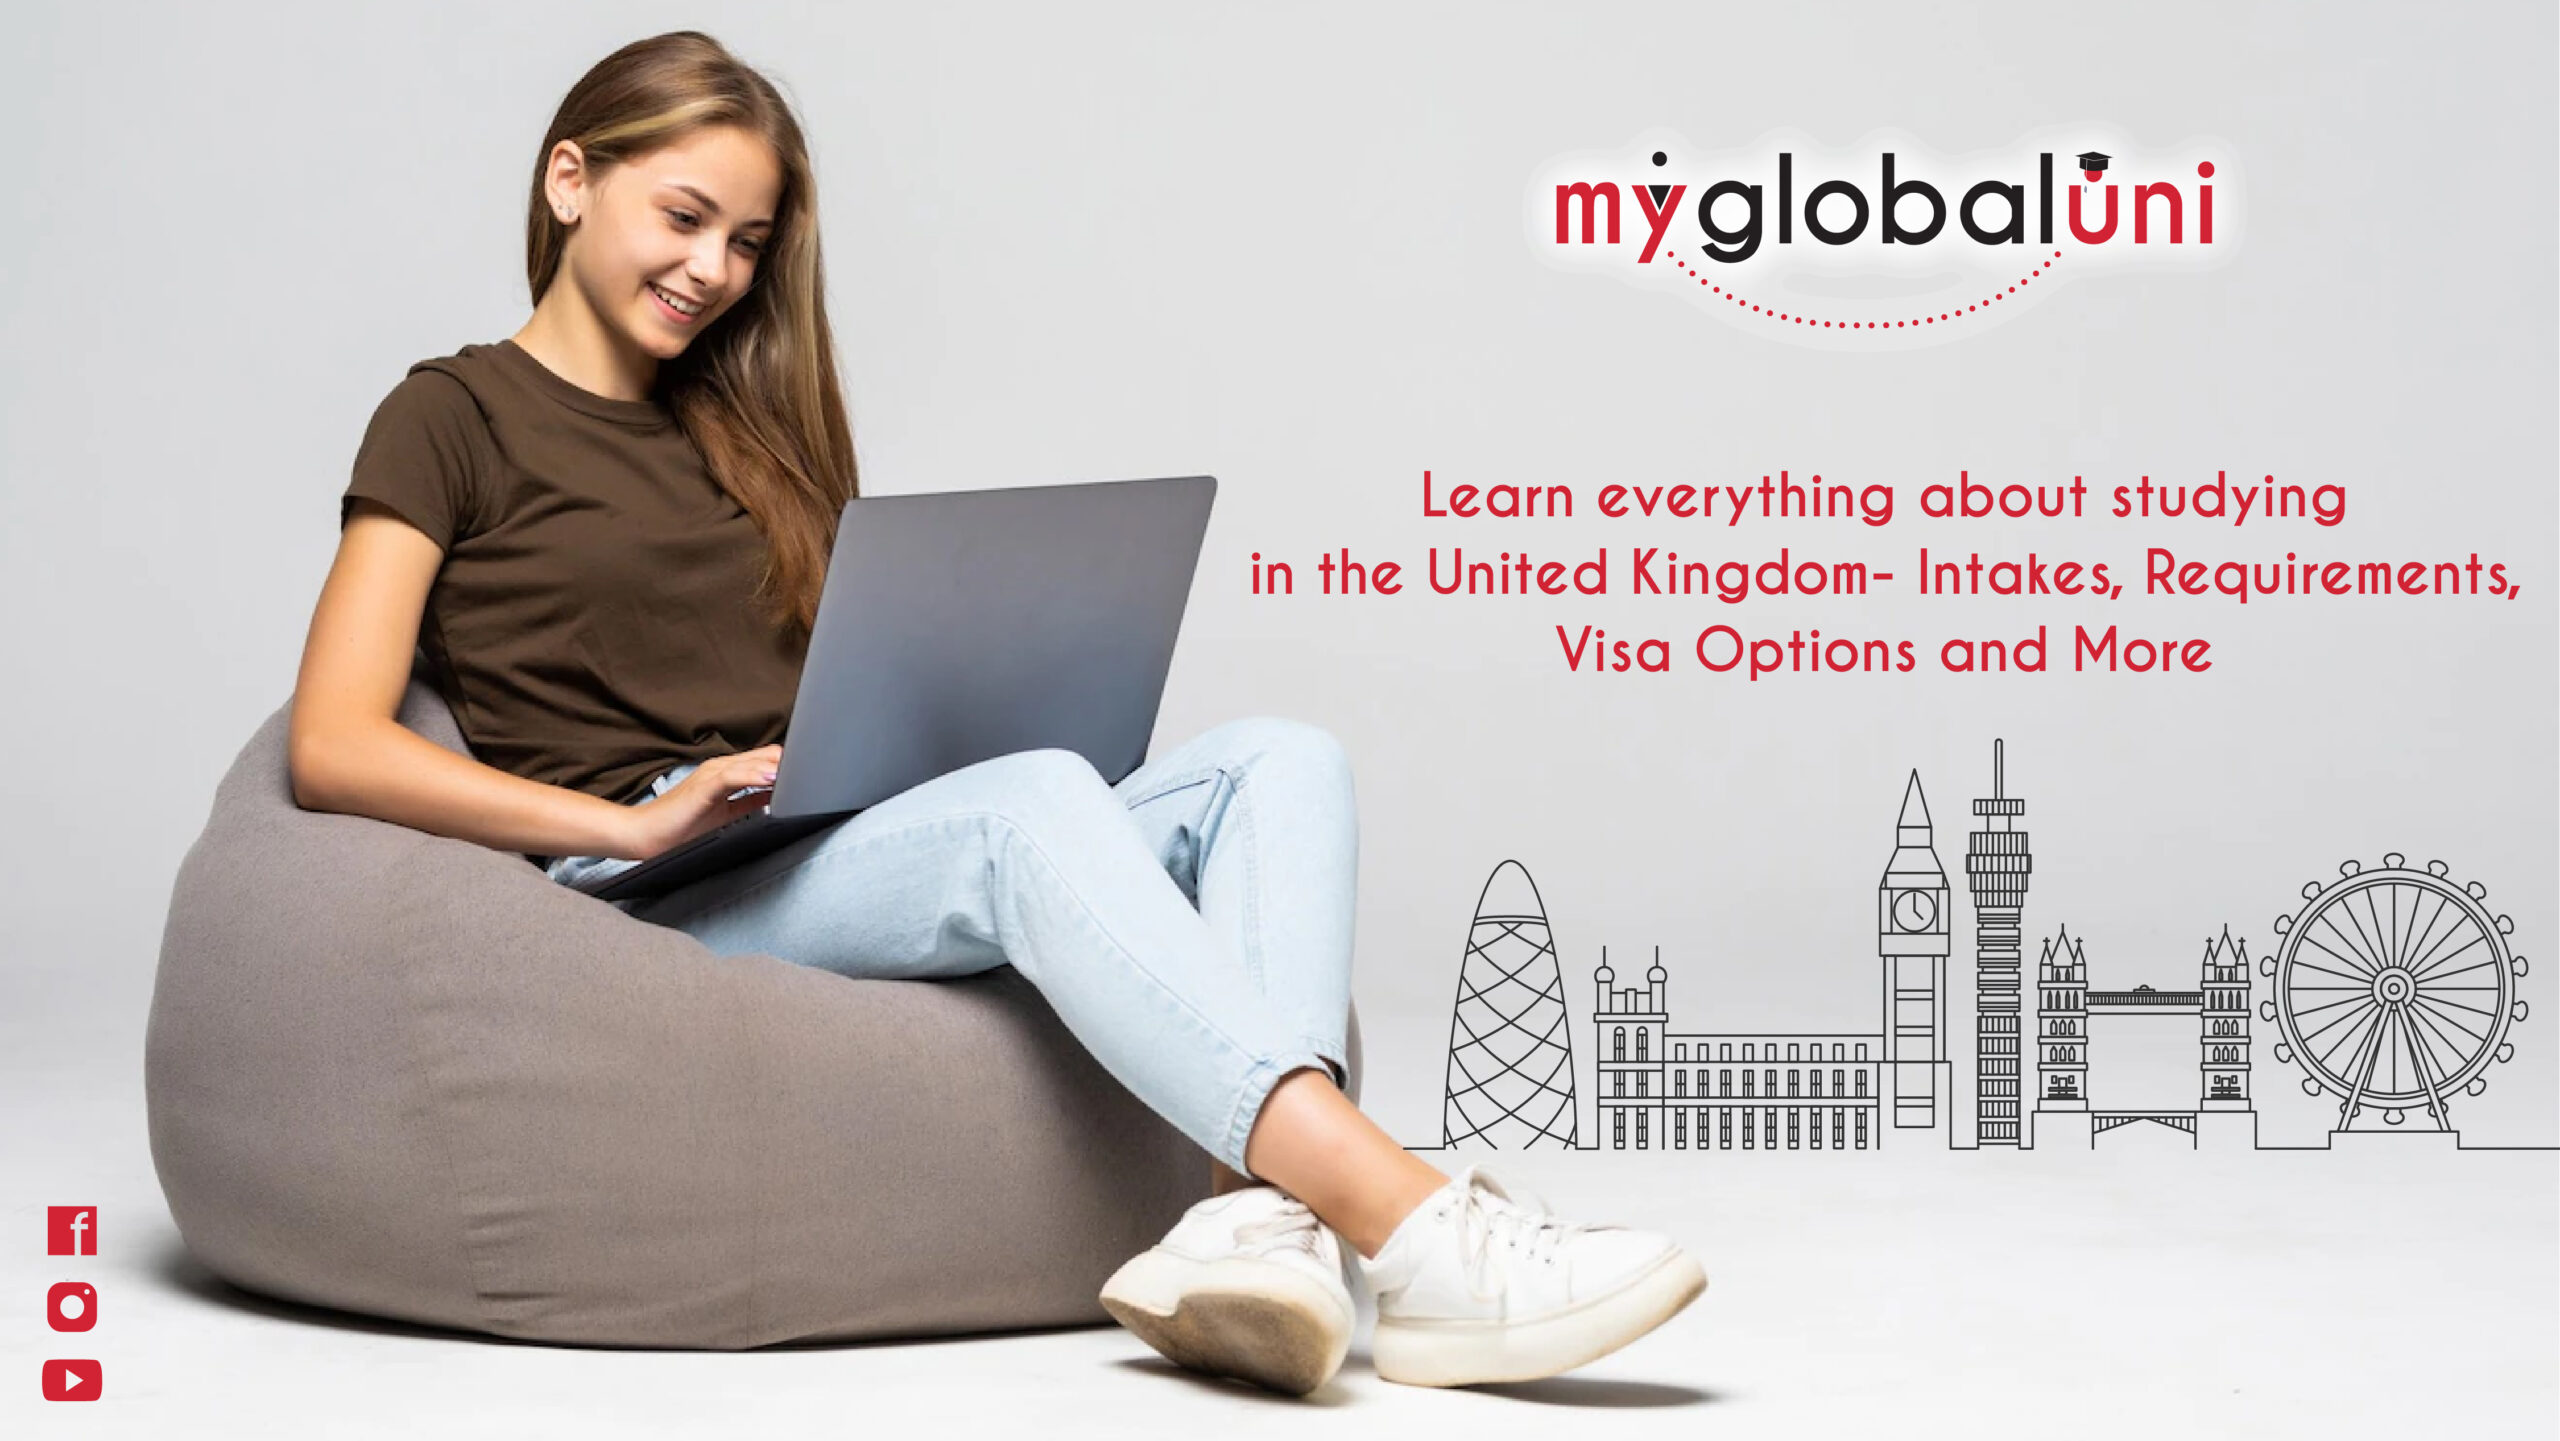 Learn everything about studying in the United Kingdom- Intakes, Requirements, Visa options and more